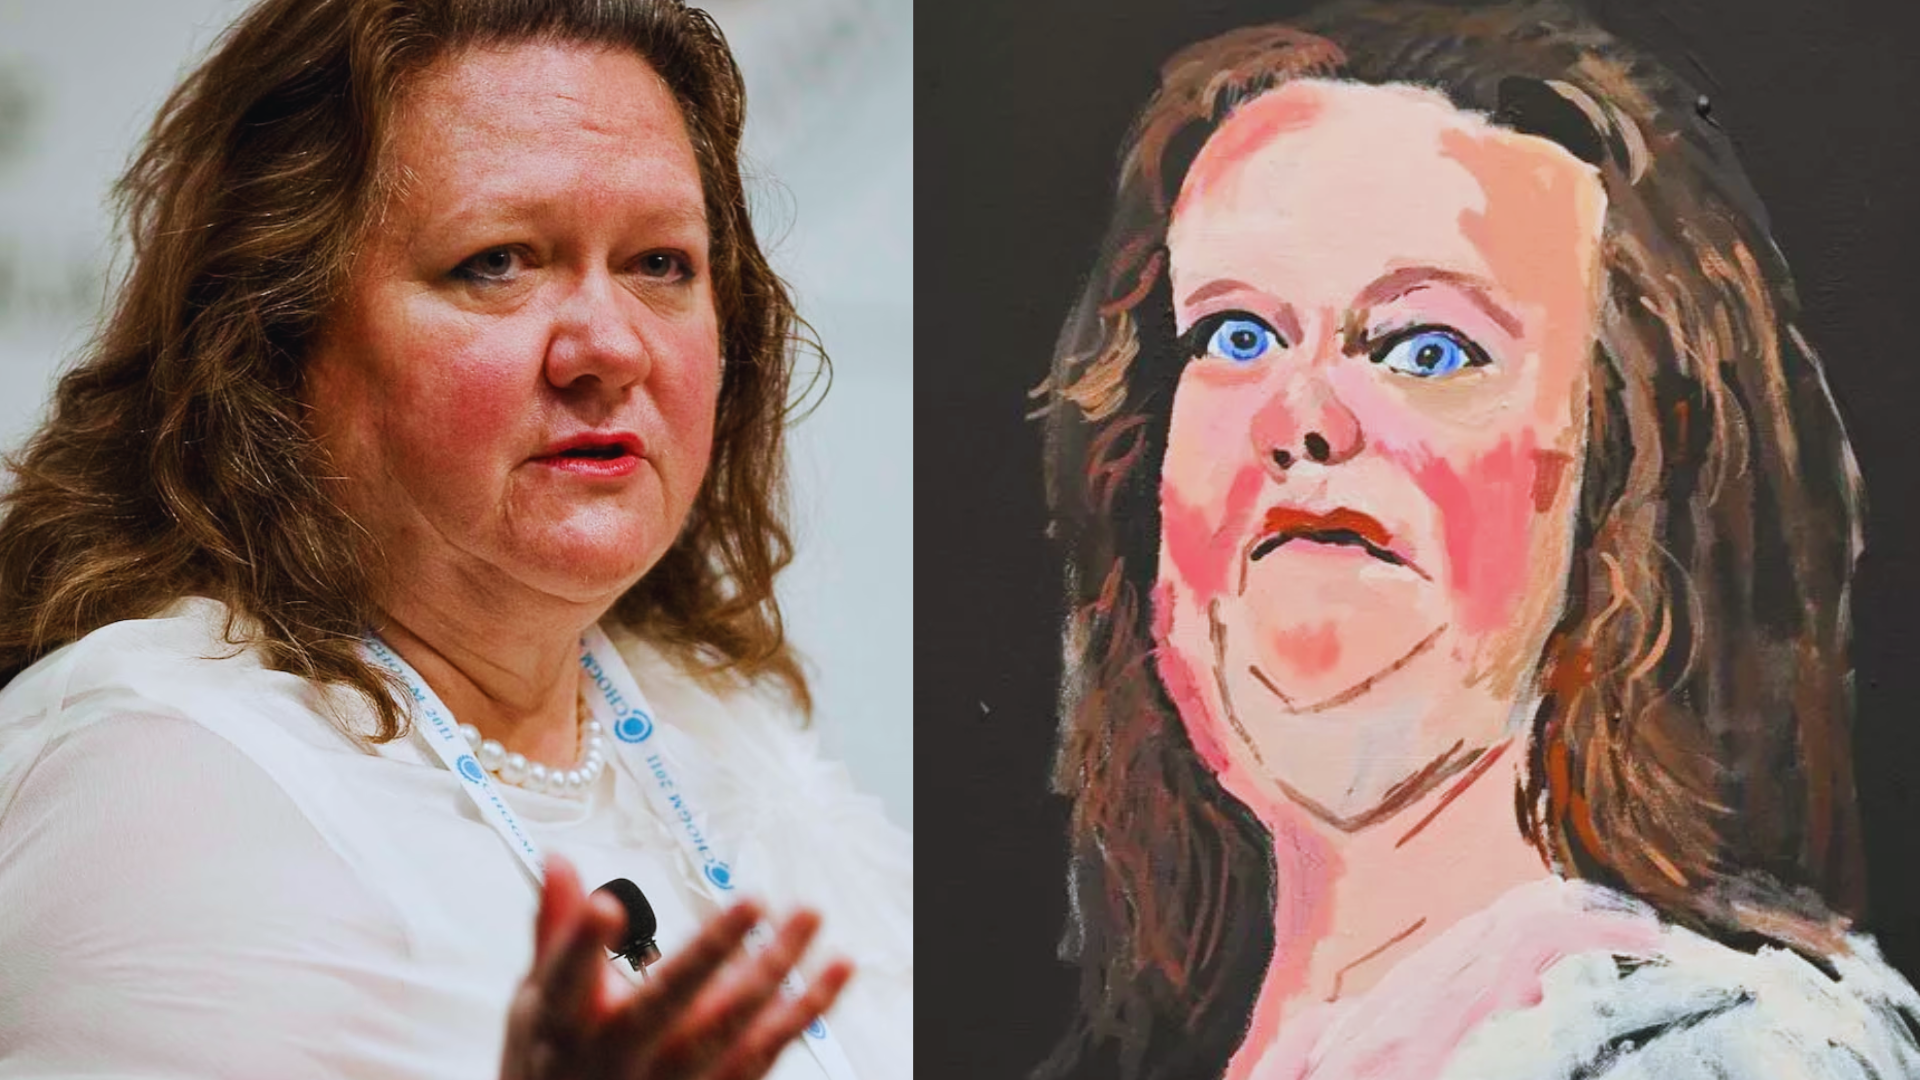 Australia’s Mining Tycoon Gina Rinehart Demands Removal Of Her Portrait From The Museum